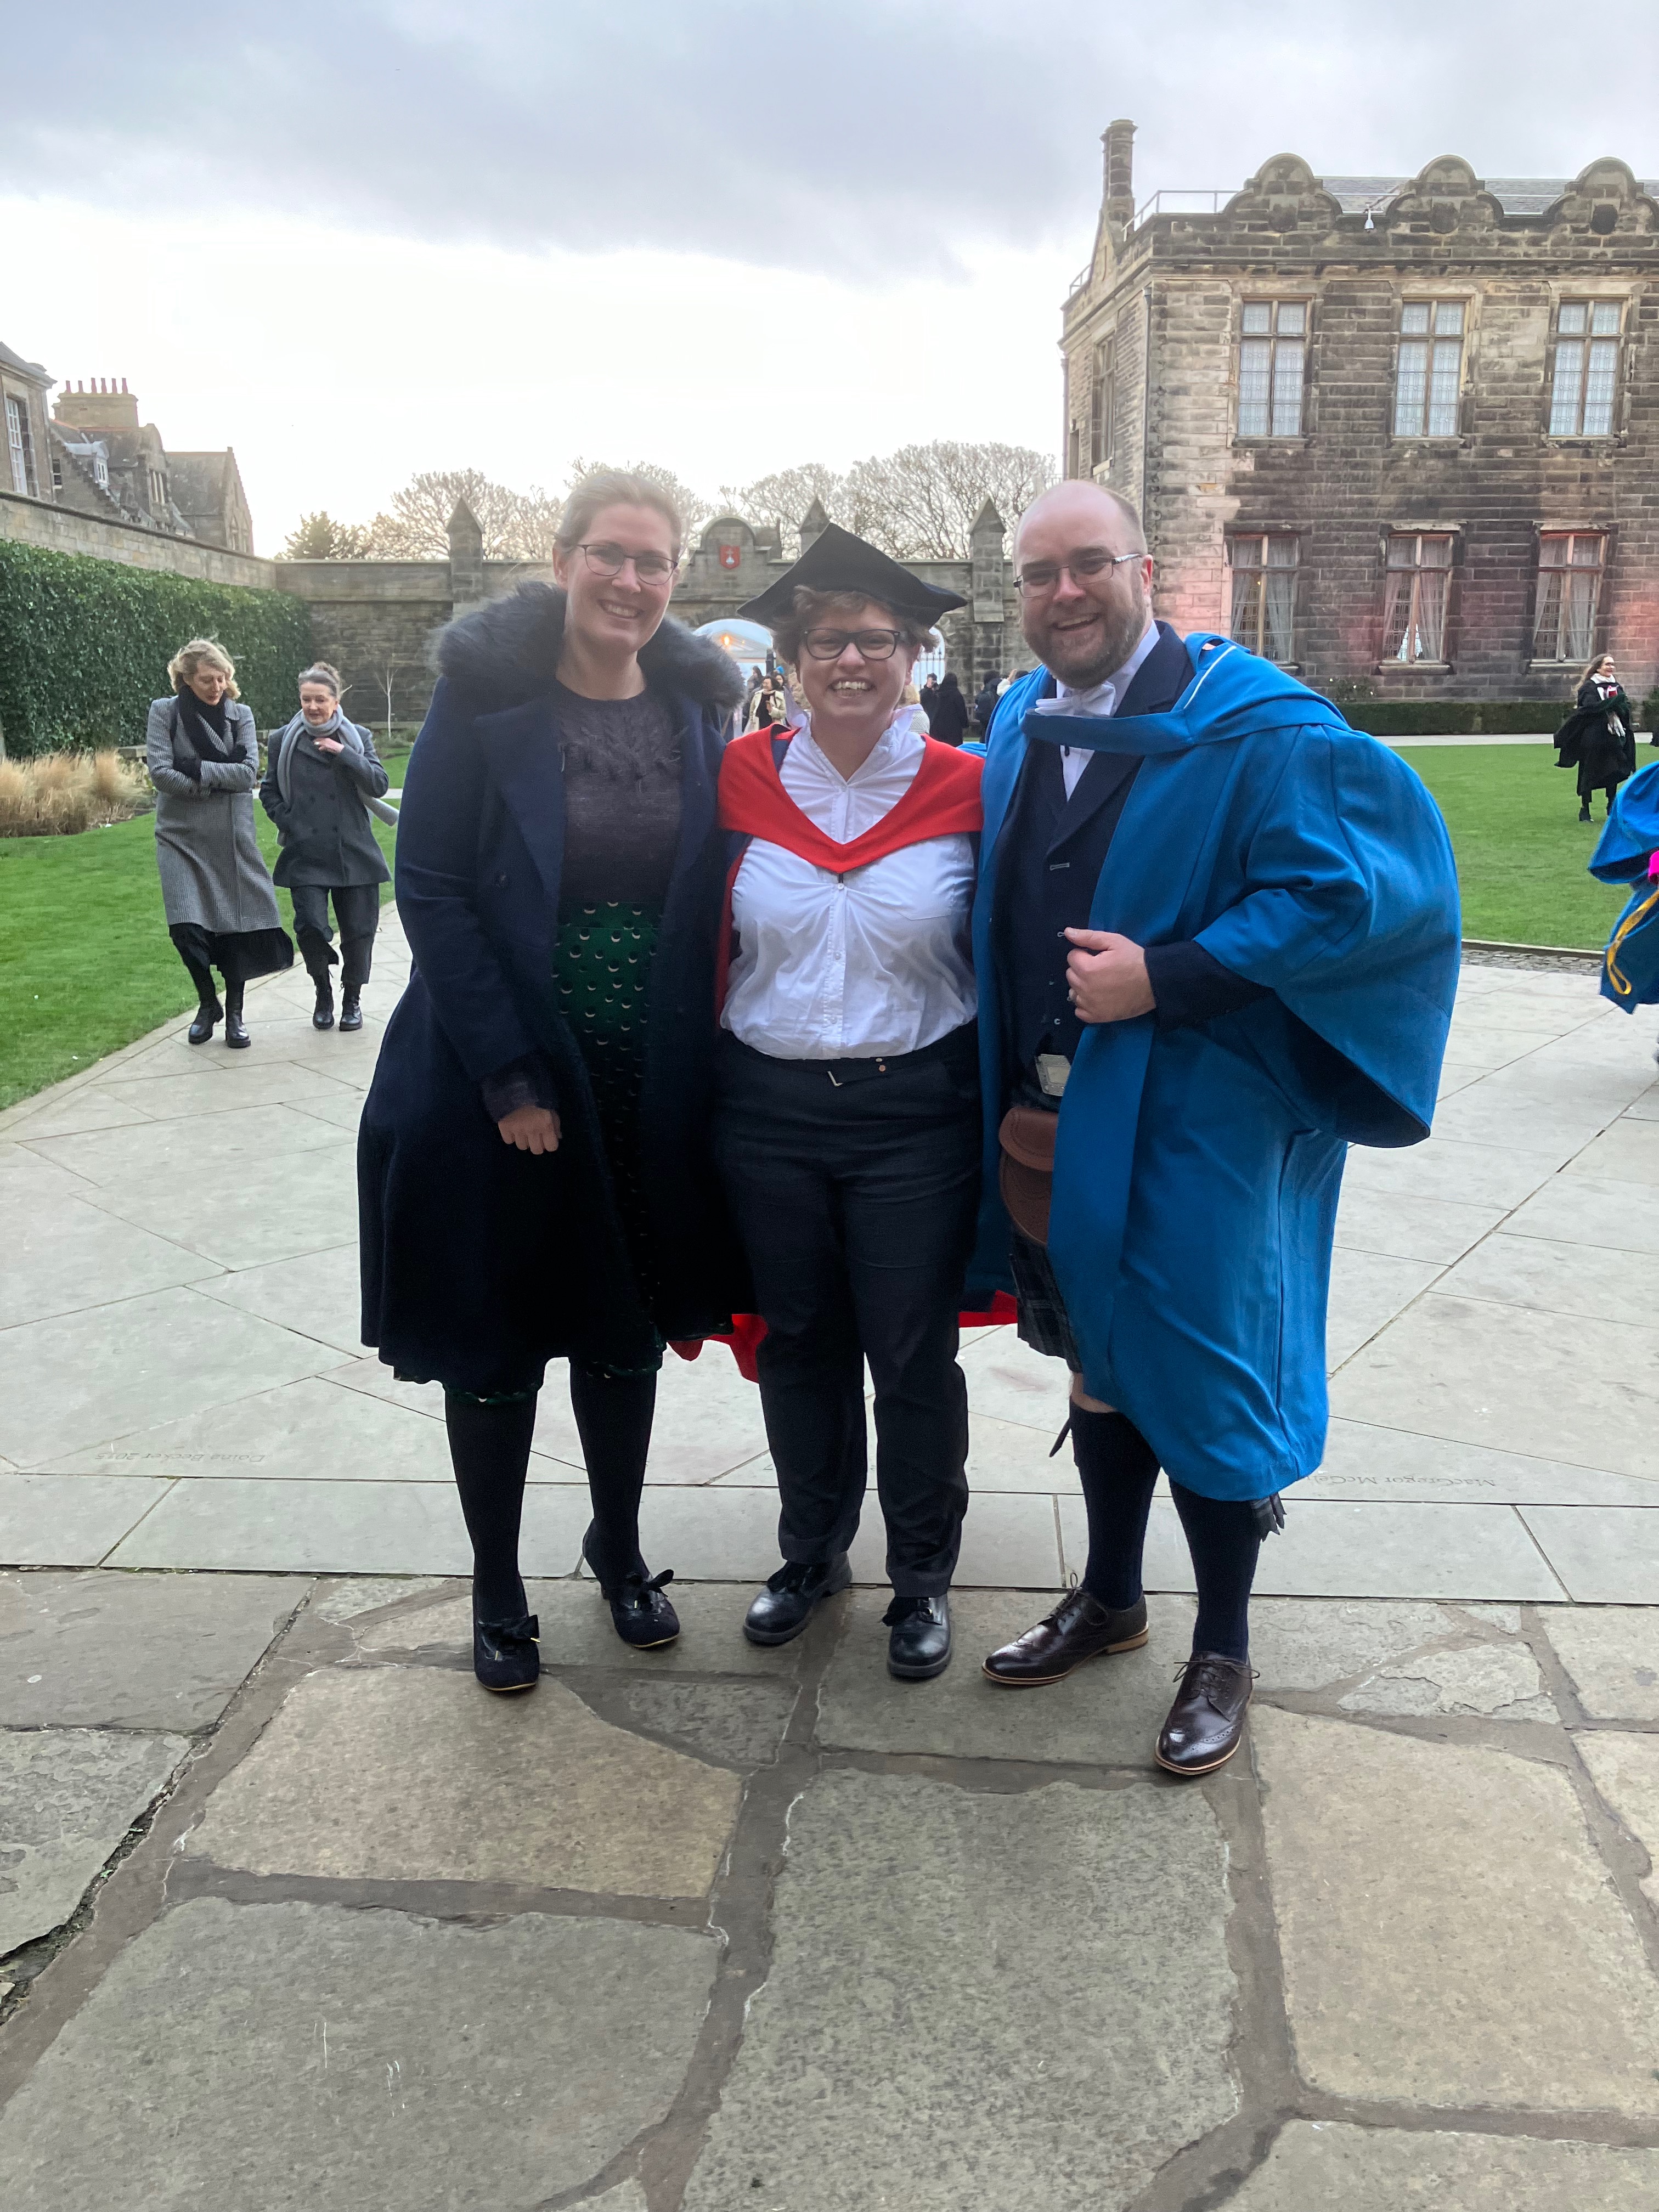 Ronan, Janet and Ronan's wife standing and smiling at the University of St Andrews. Ronan is wearing a kilt and graduation gown.